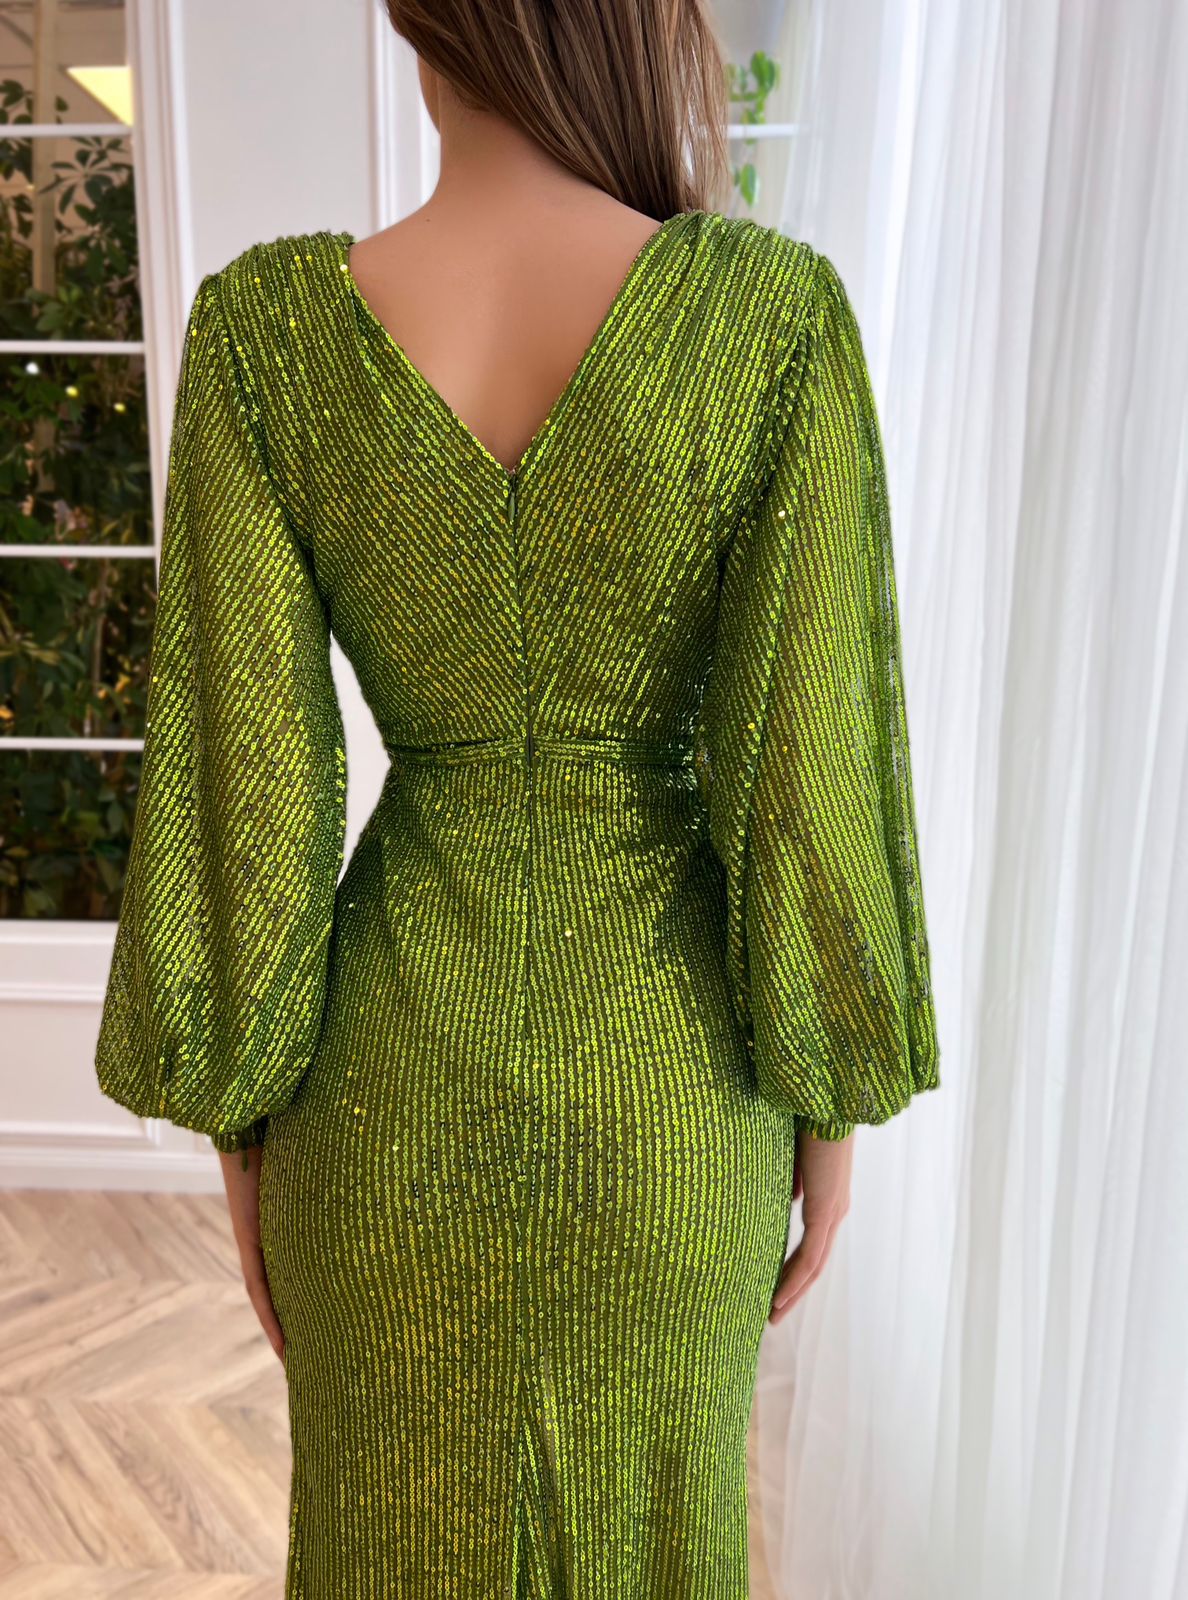 Green mermaid dress with sequins, v-neck and long sleeves